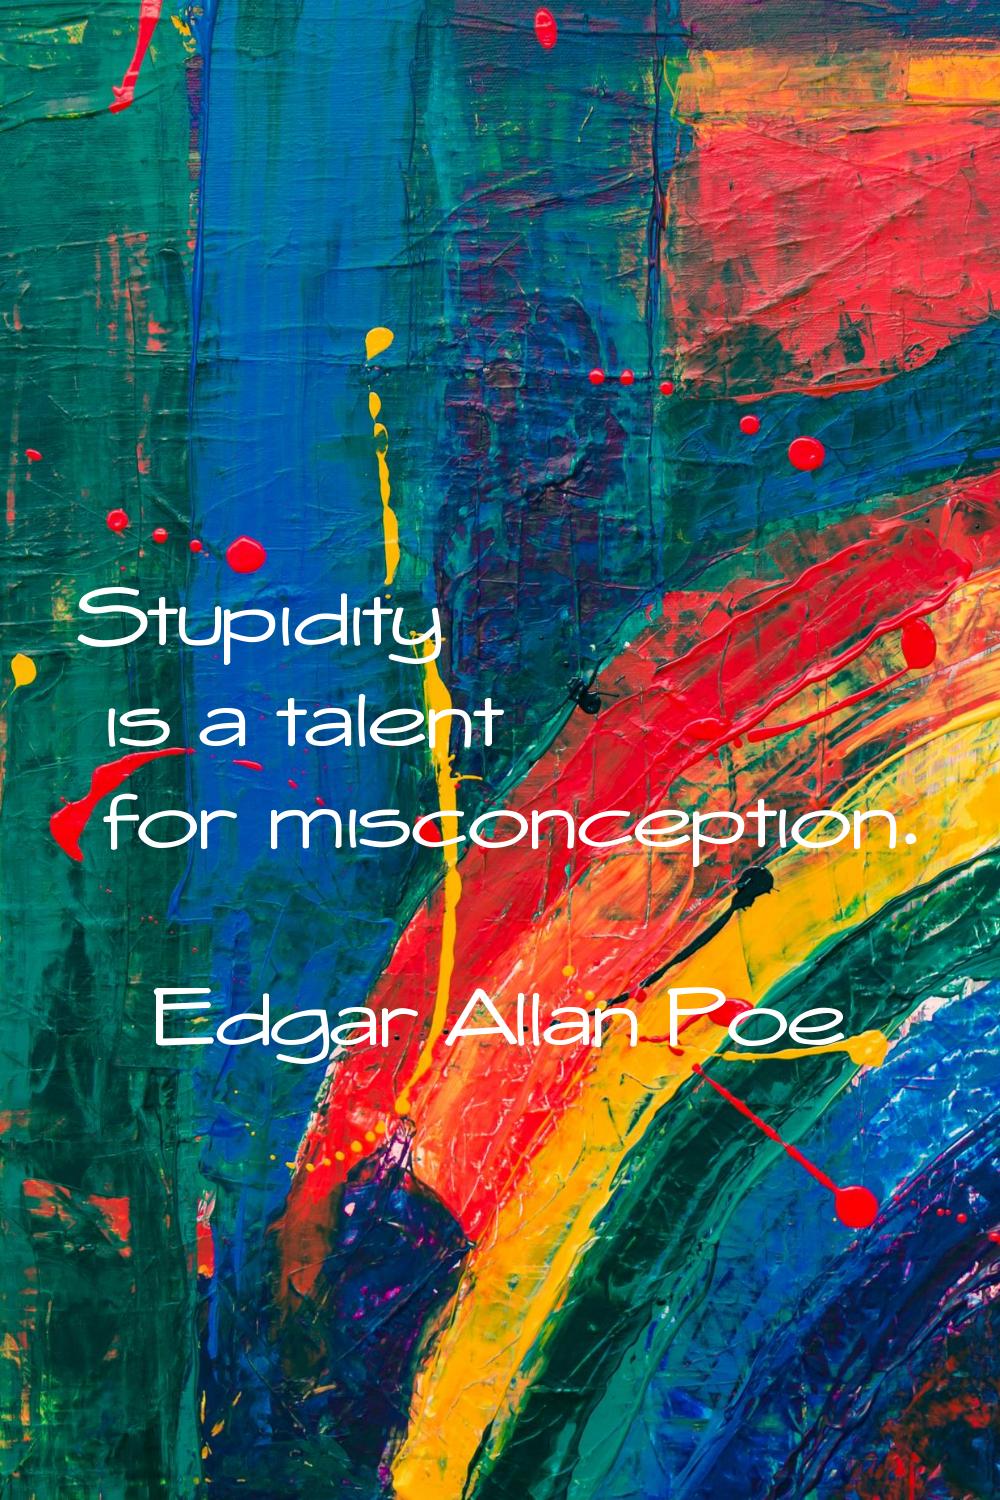 Stupidity is a talent for misconception.